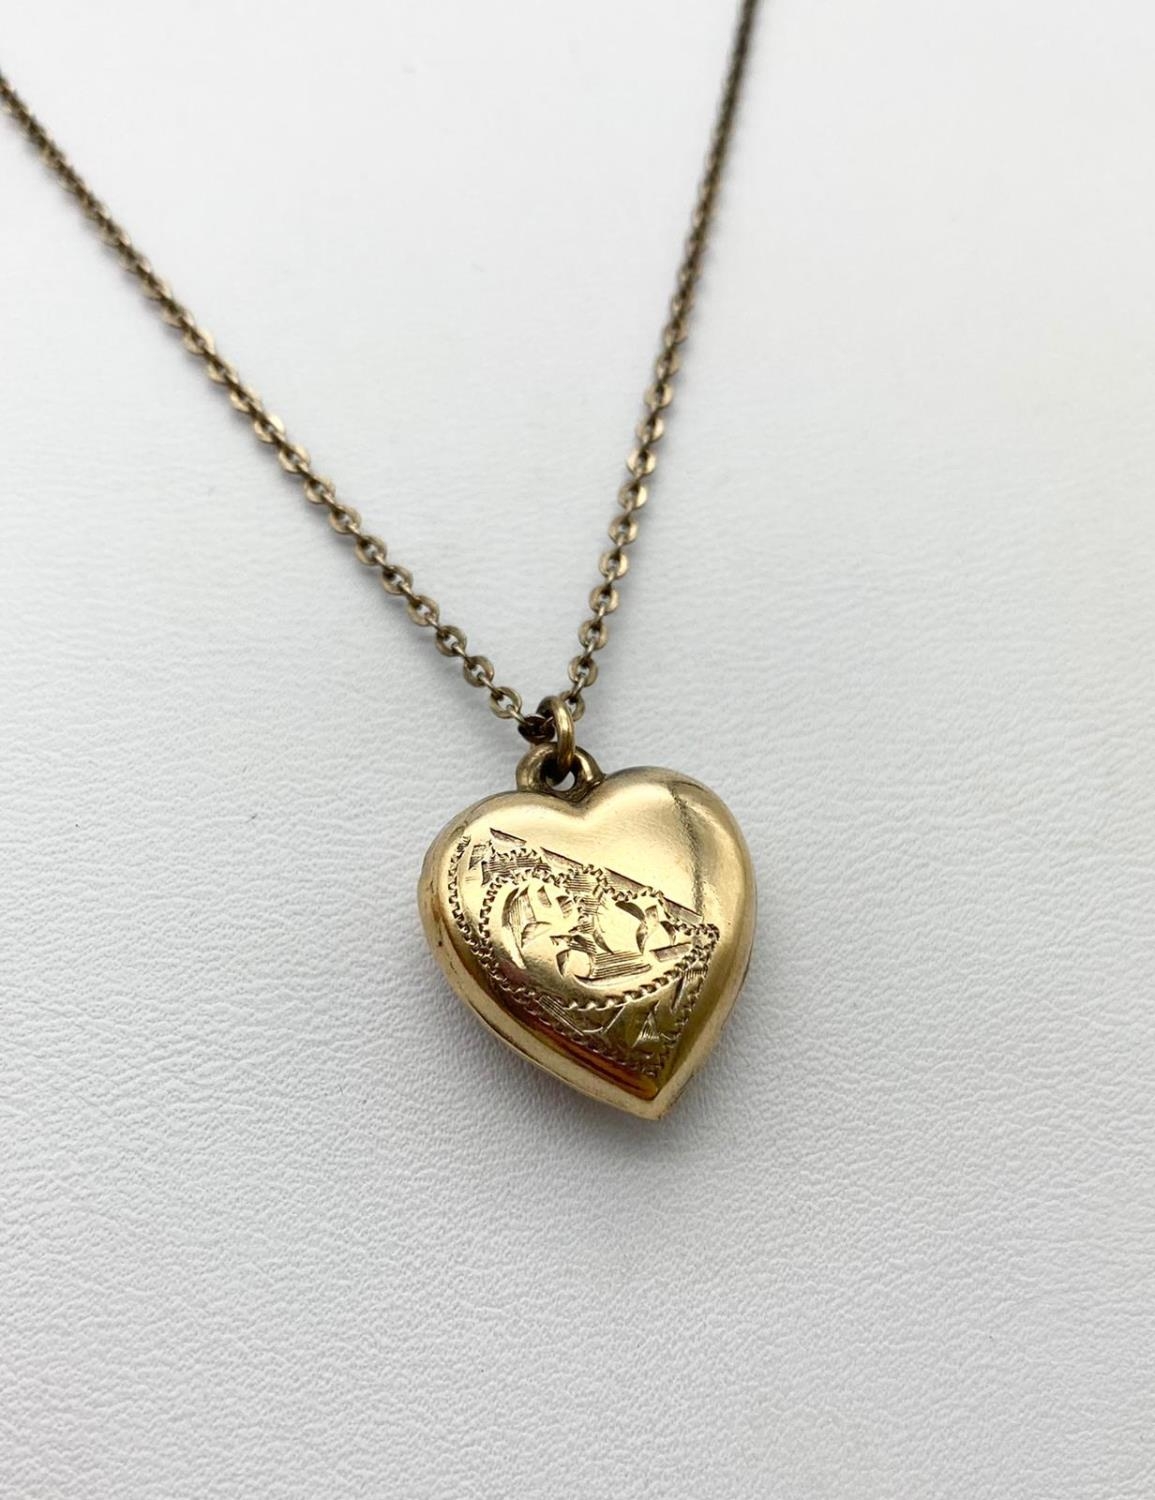 Silver Necklace with Heart Locket and Charm. 44cm 3.9g - Image 2 of 3